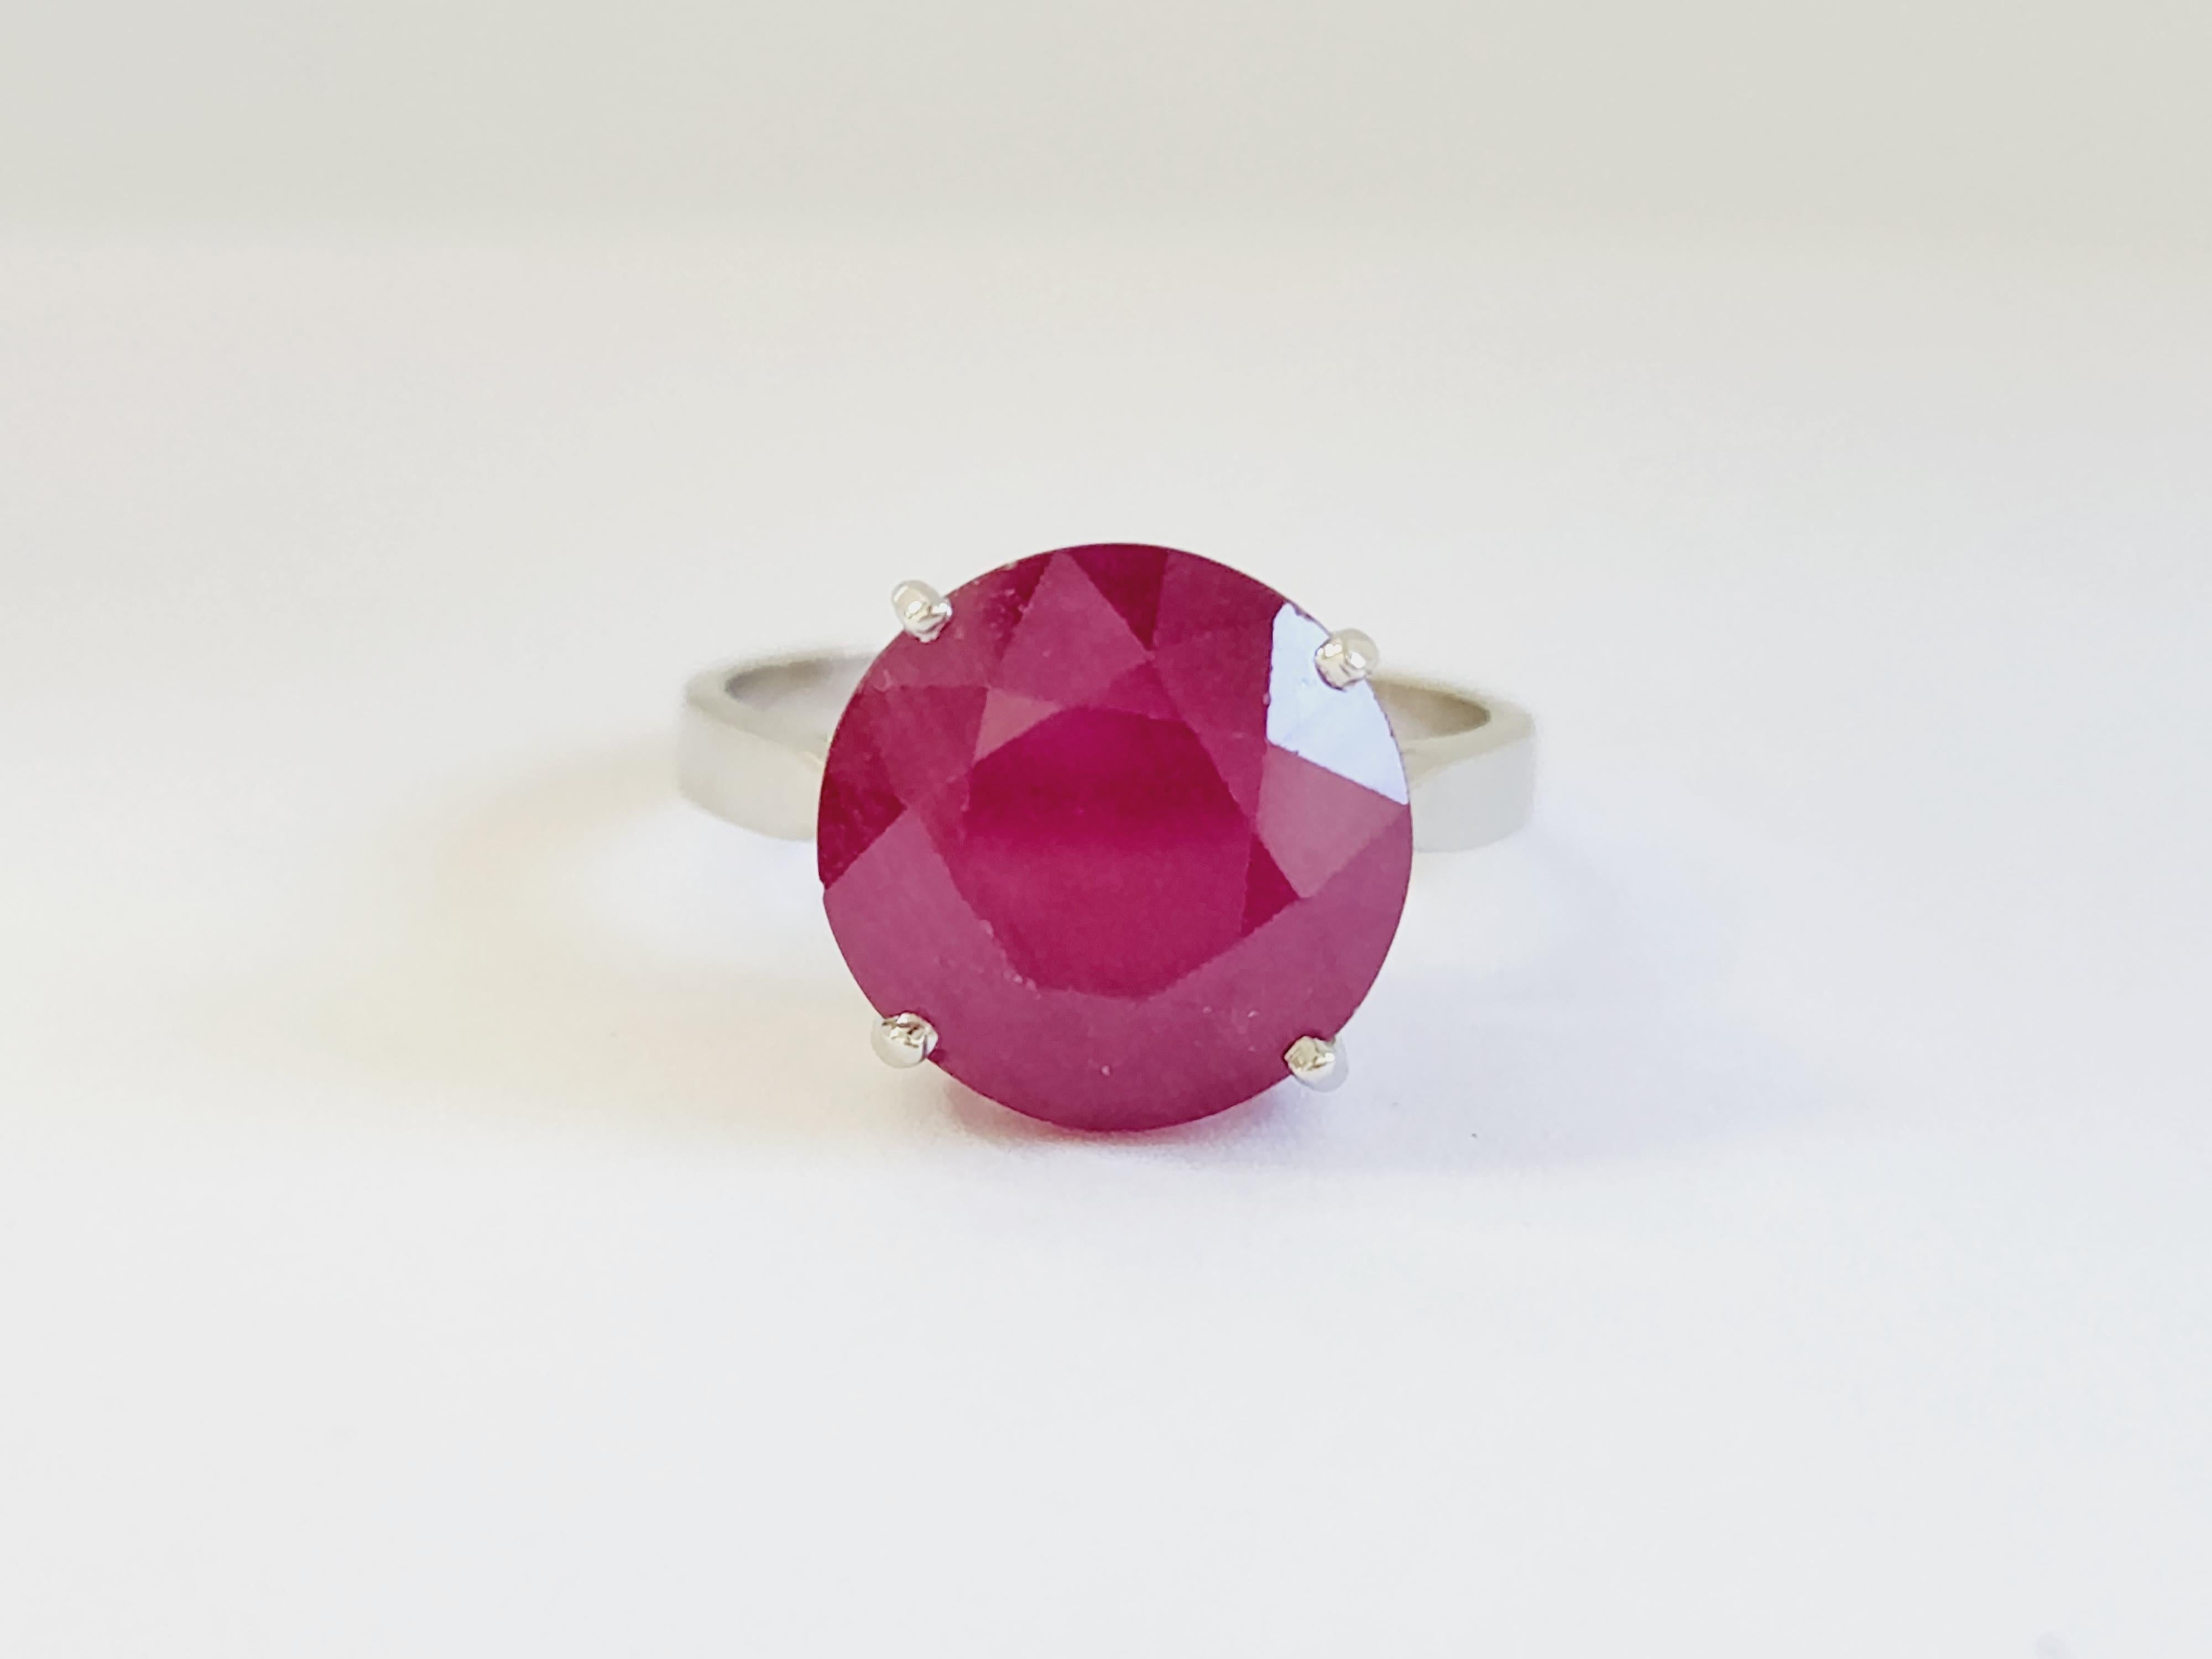 12 Carats Ruby Round Classic 4 Prong Setting White Gold Ring 14 Karat. Unique, Brilliant, and Beautiful.

Cushion Ruby Size: 12 Carats
Ring Size: 9
Glass Filled